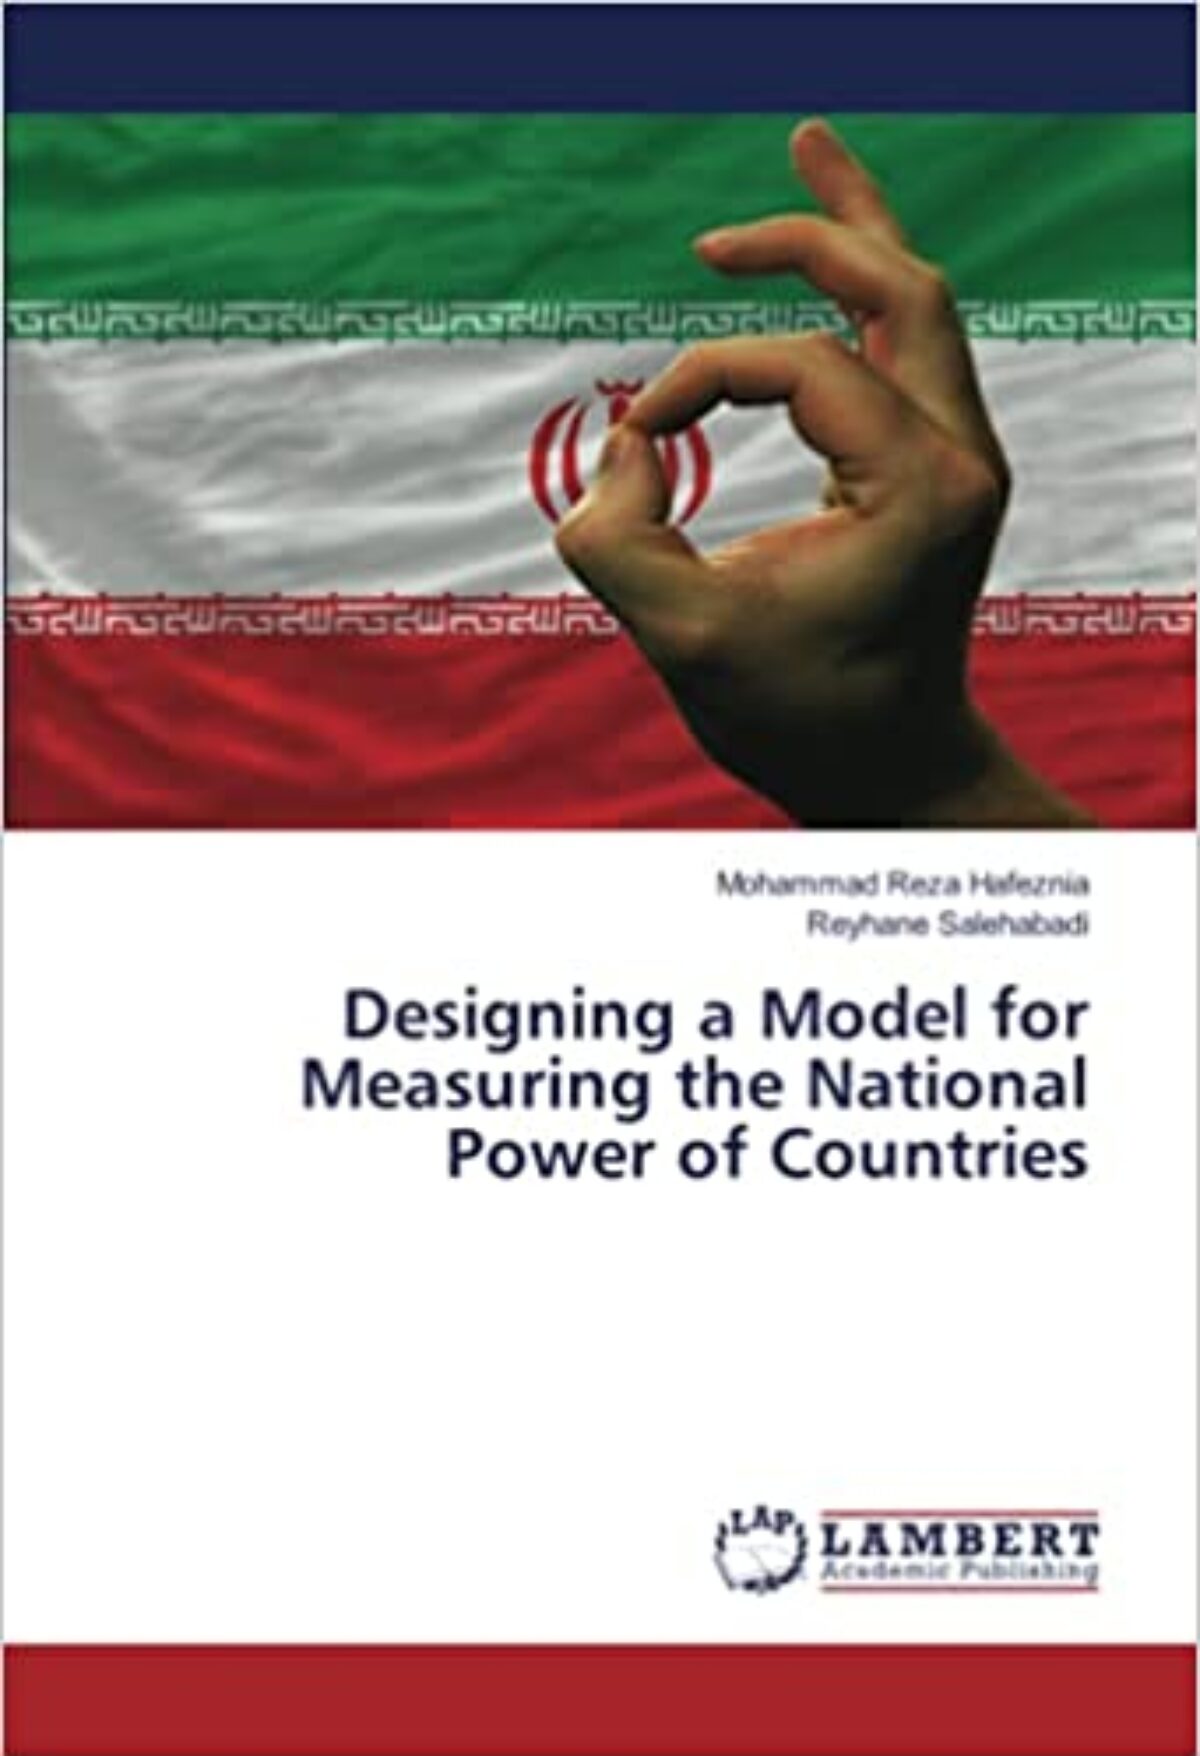 Designing a model for measuring the national power of countries